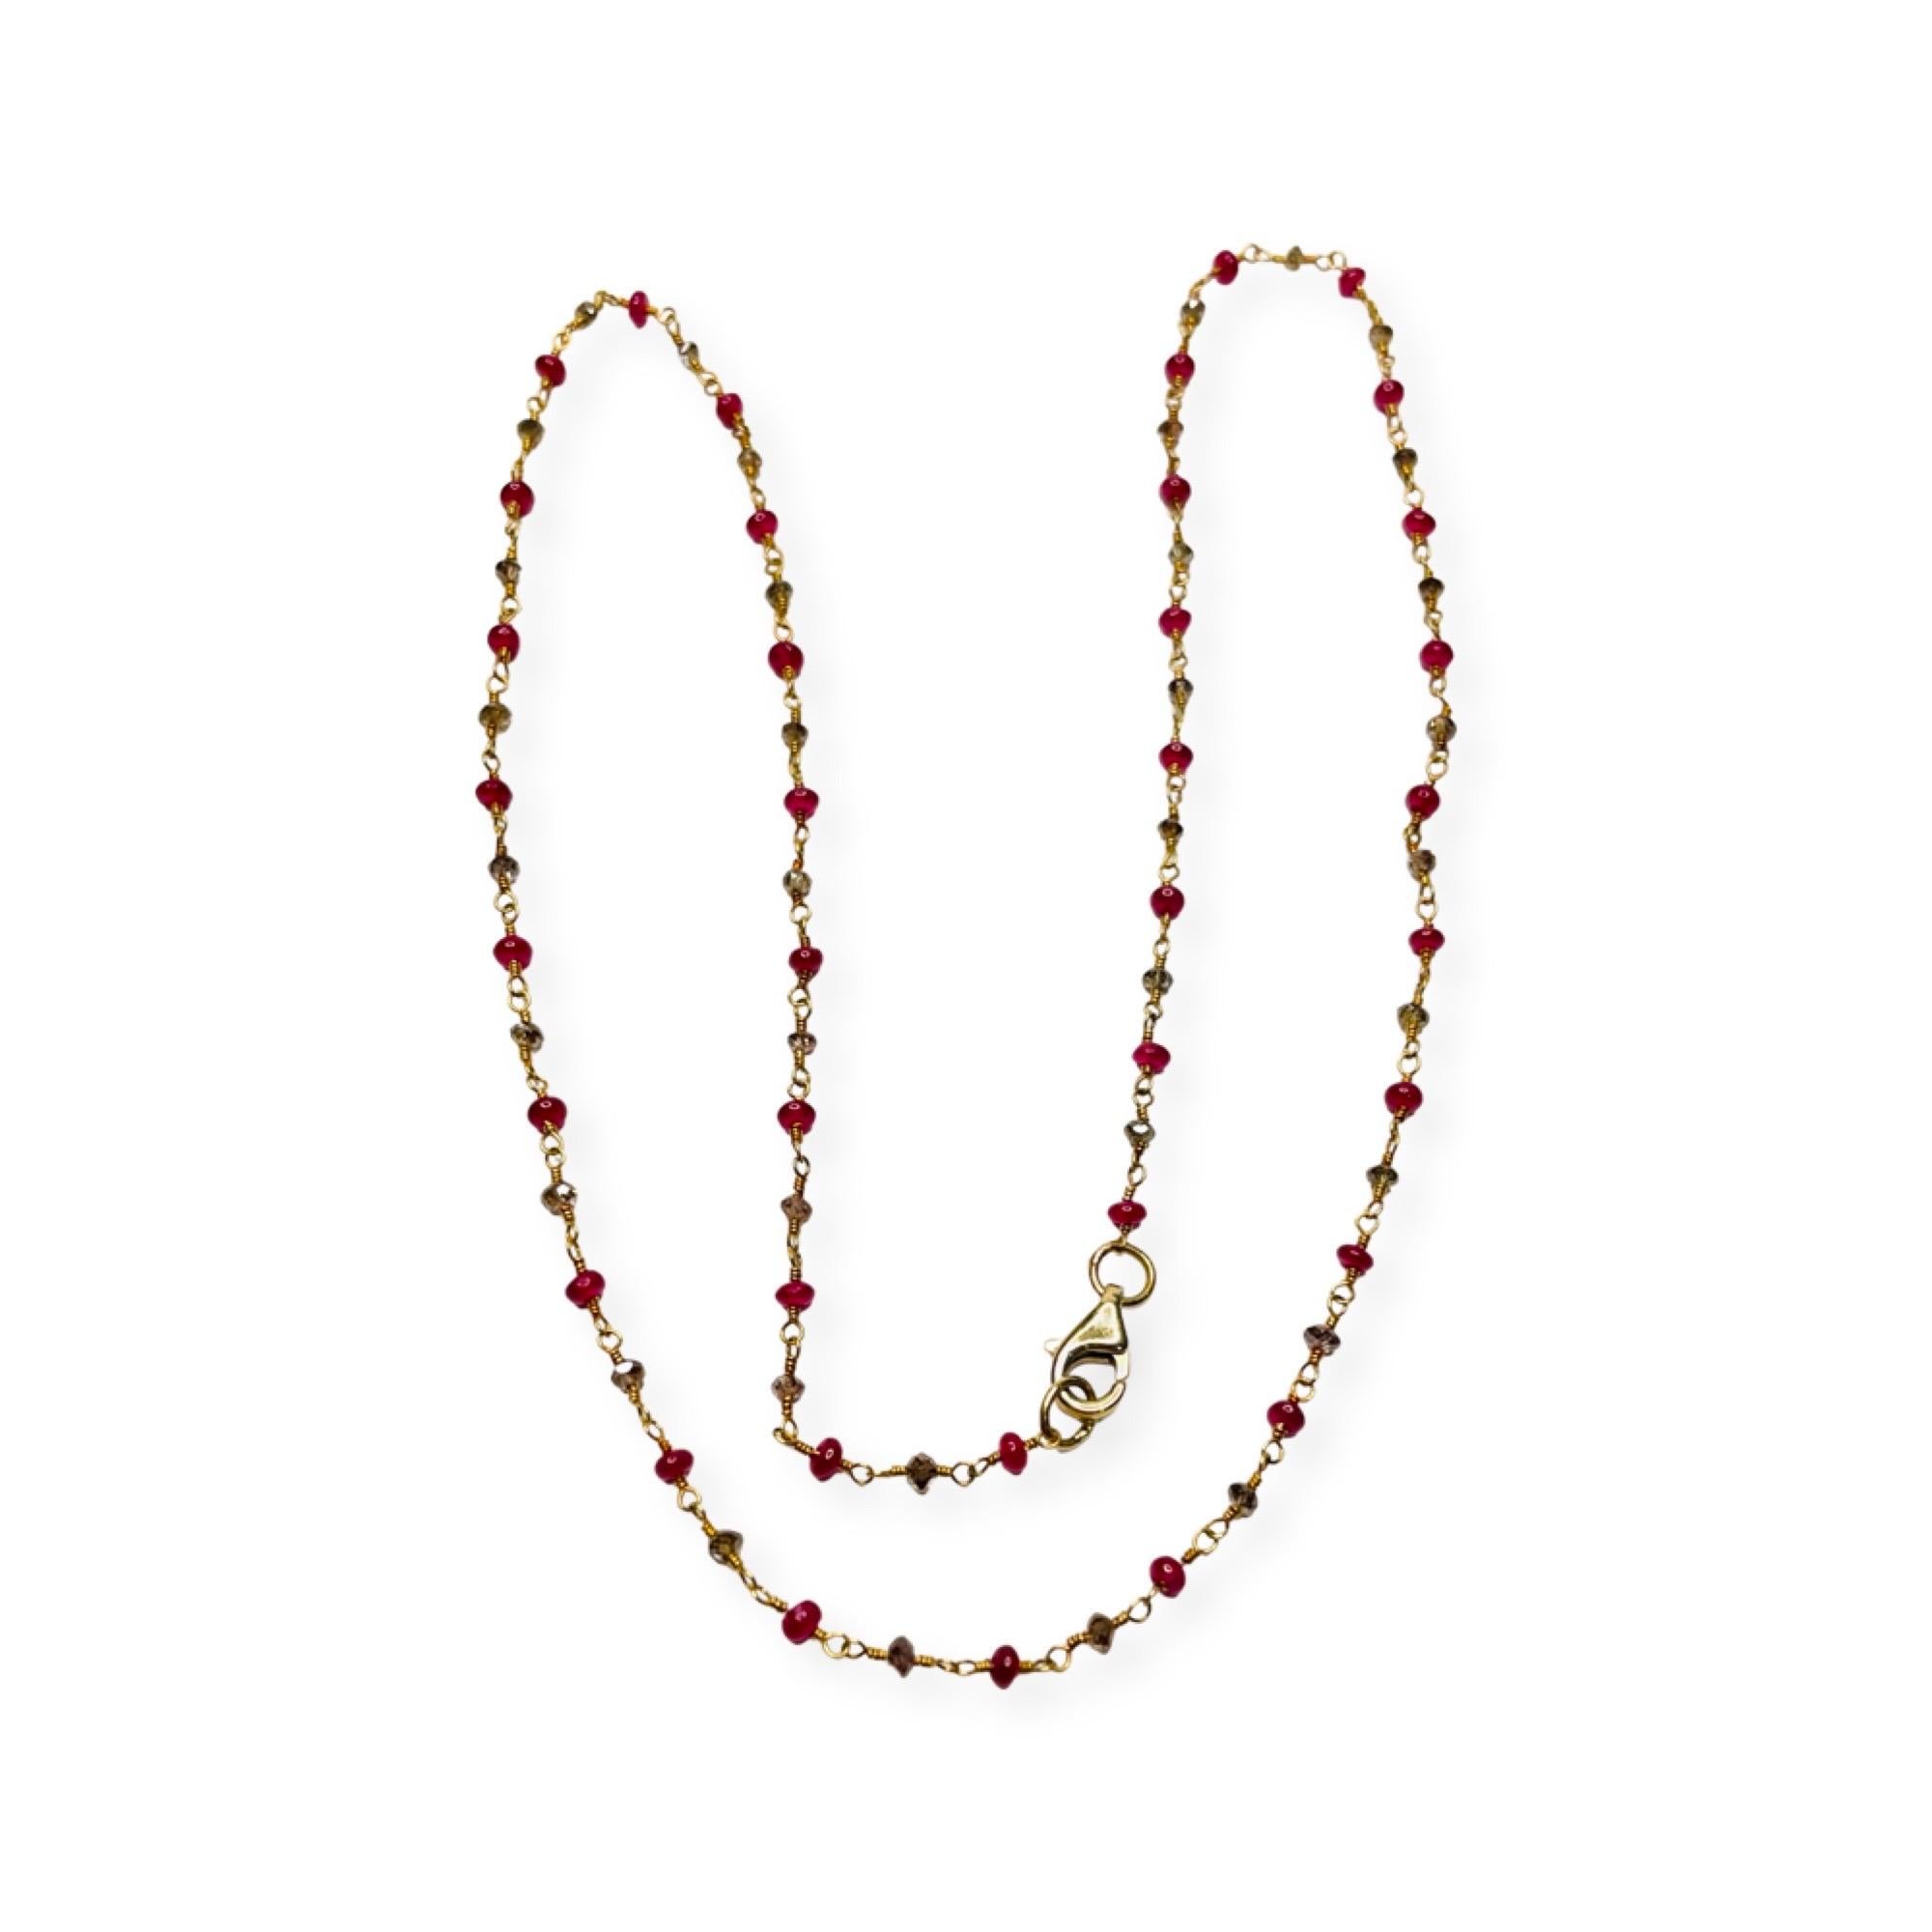 Lithos 18K Yellow Gold  Ruby Bead and Natural Color Brown Diamond Necklace. The handmade chain has a wire that runs through the rubies and diamonds.  The wire twists at each end and connects with a ring. There are ruby beads and faceted diamond